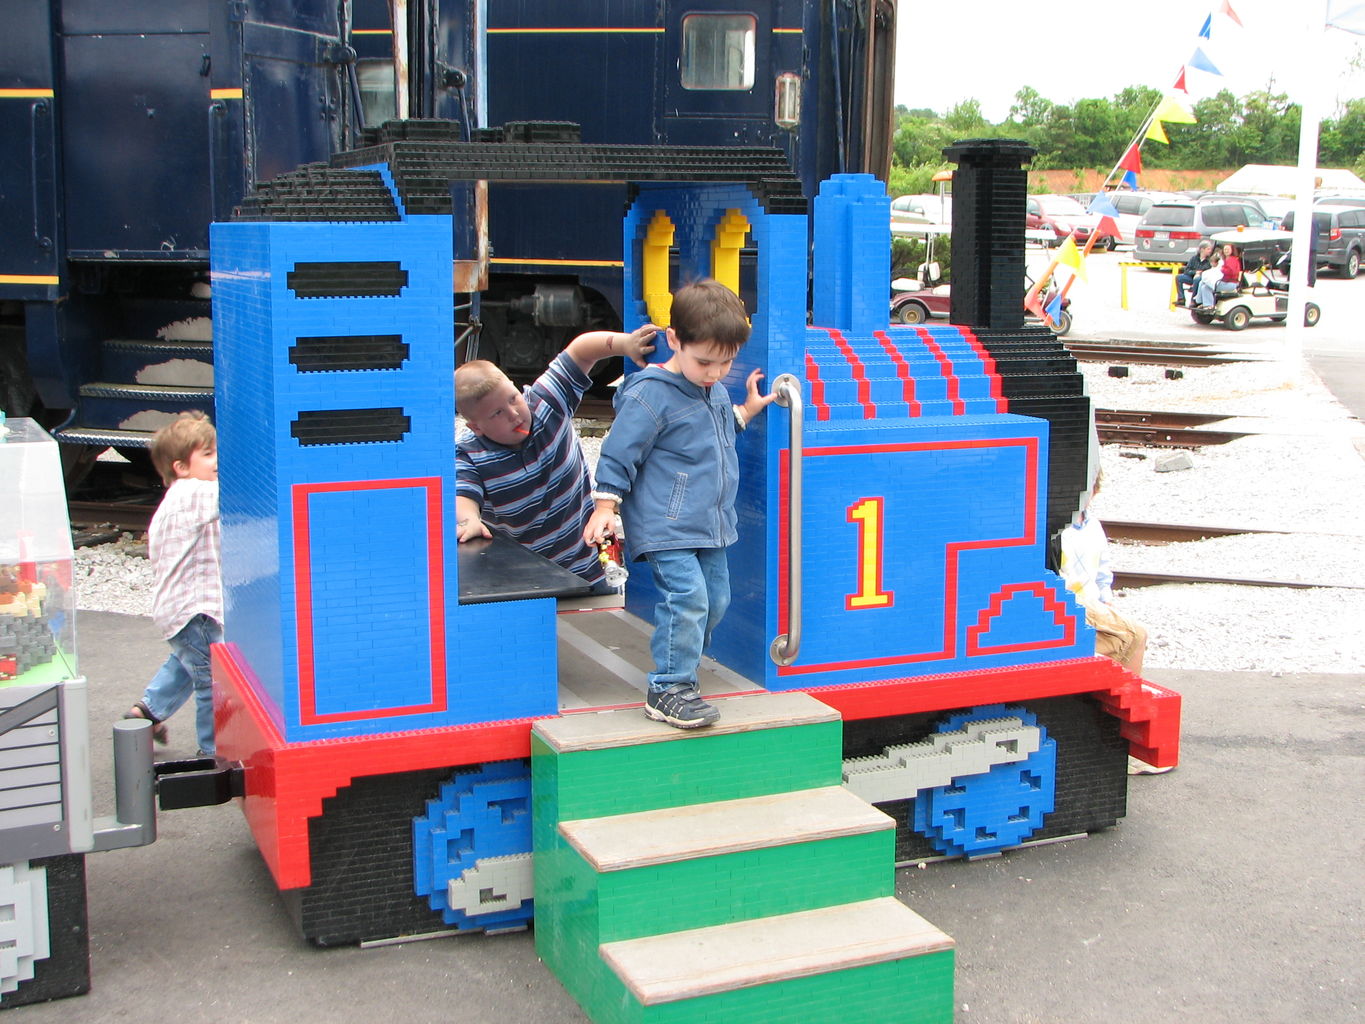 A Trip with Thomas the Tank Engine
